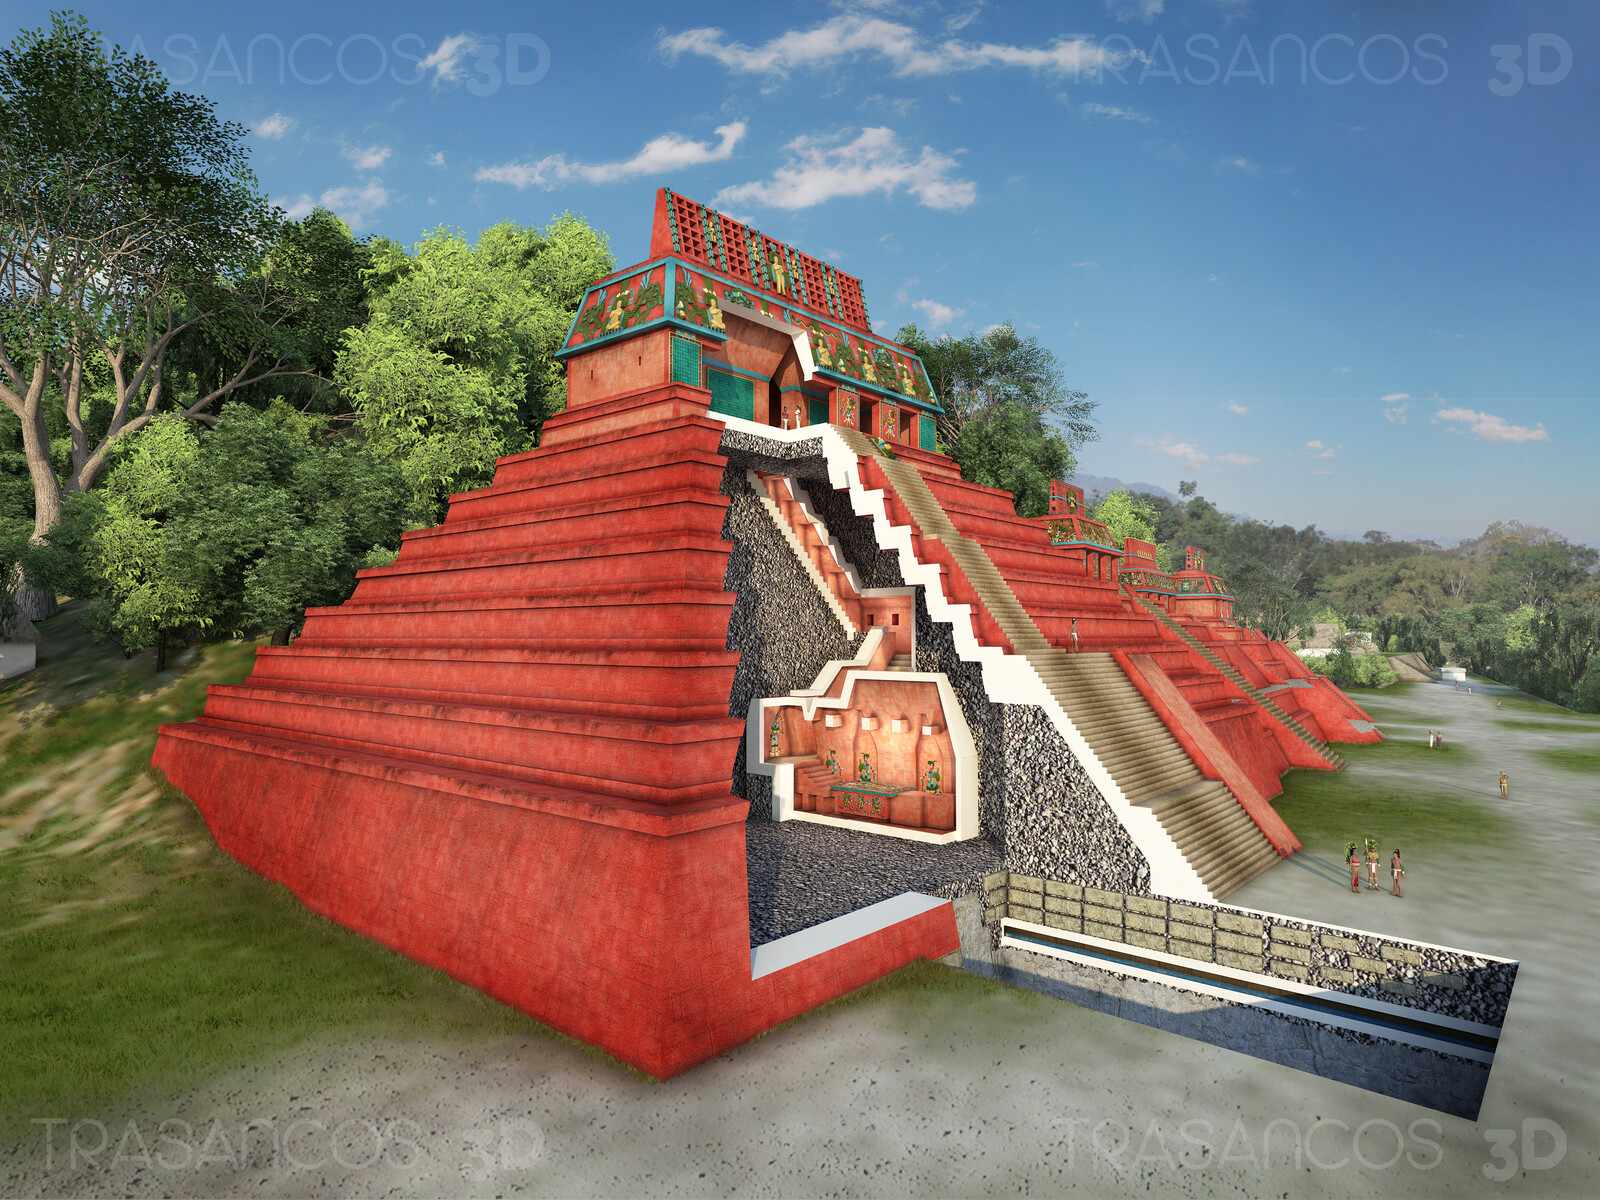 Cut away of the Temple of Inscriptions, showing the tomb of the king Pacal the Great and the underground water chanel.
Modeled in collaboration with:
- Carlos Paz